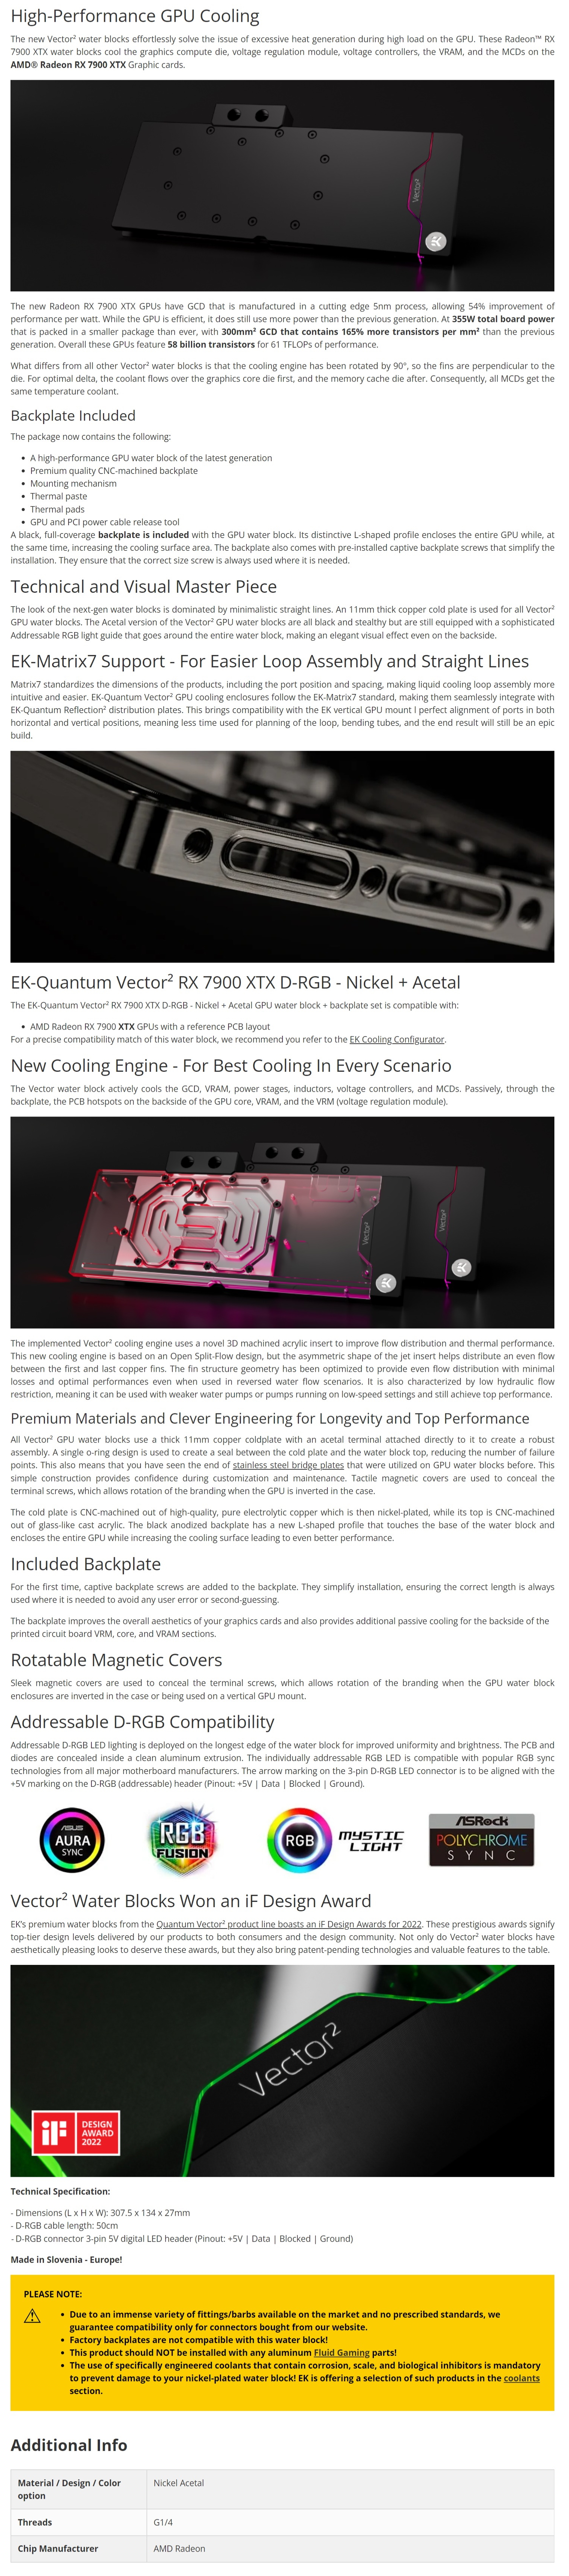 A large marketing image providing additional information about the product EK Quantum Vector2 RX 7900 XTX D-RGB Nickel+Acetal GPU Waterblock - Additional alt info not provided